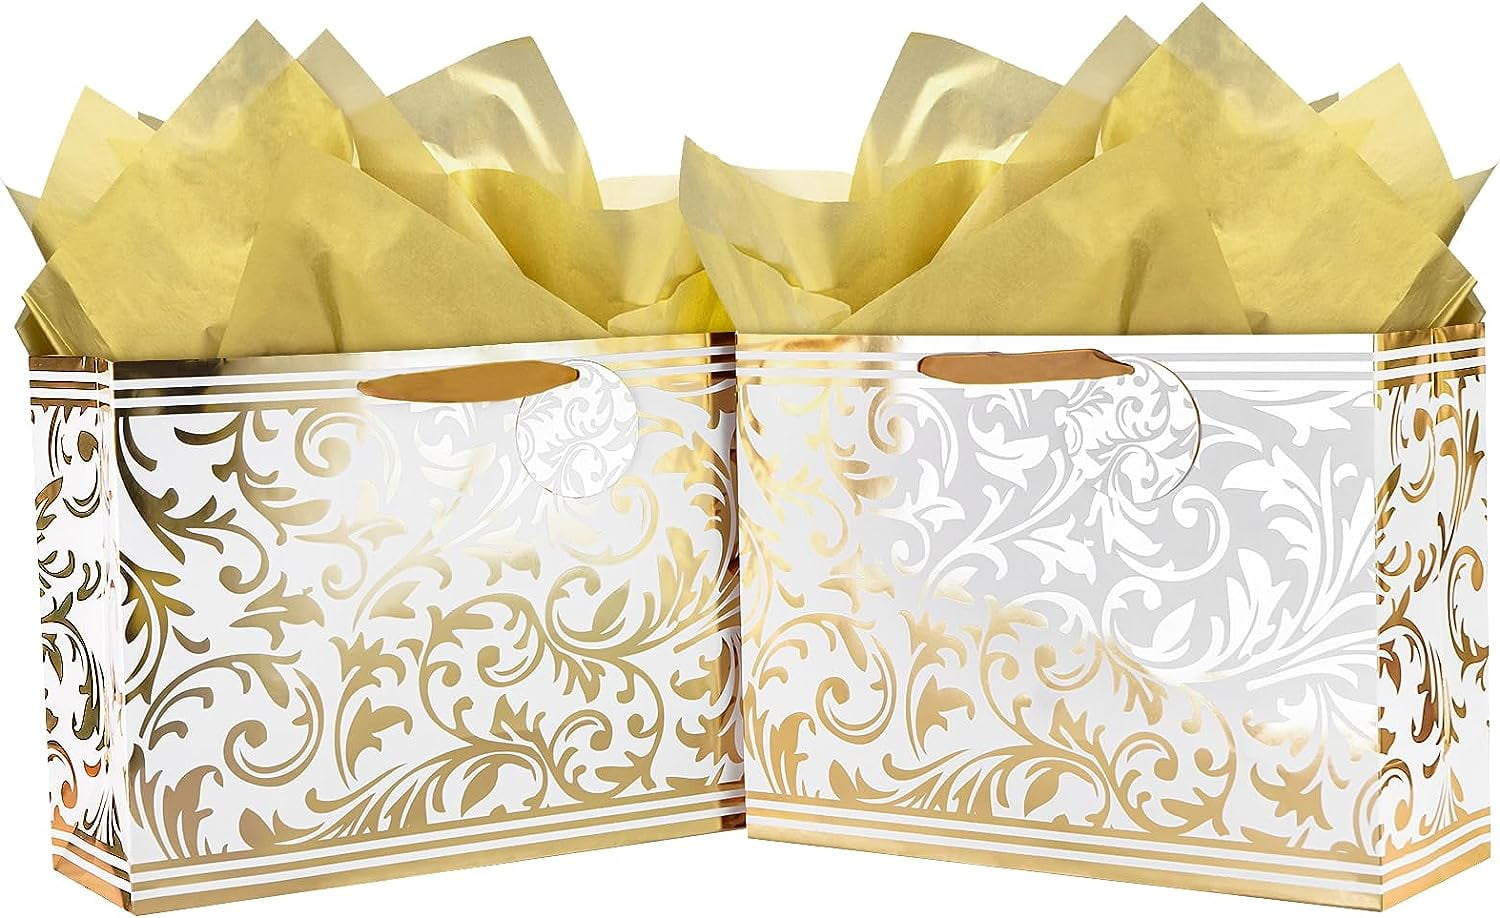 WRAPAHOLIC 16 Christmas Assorted Gift Bag Bundle with Tissue Paper - Gold  Foil Christmas Leaves Design for Holiday, Party Gift Wrap (Pack of 6) 